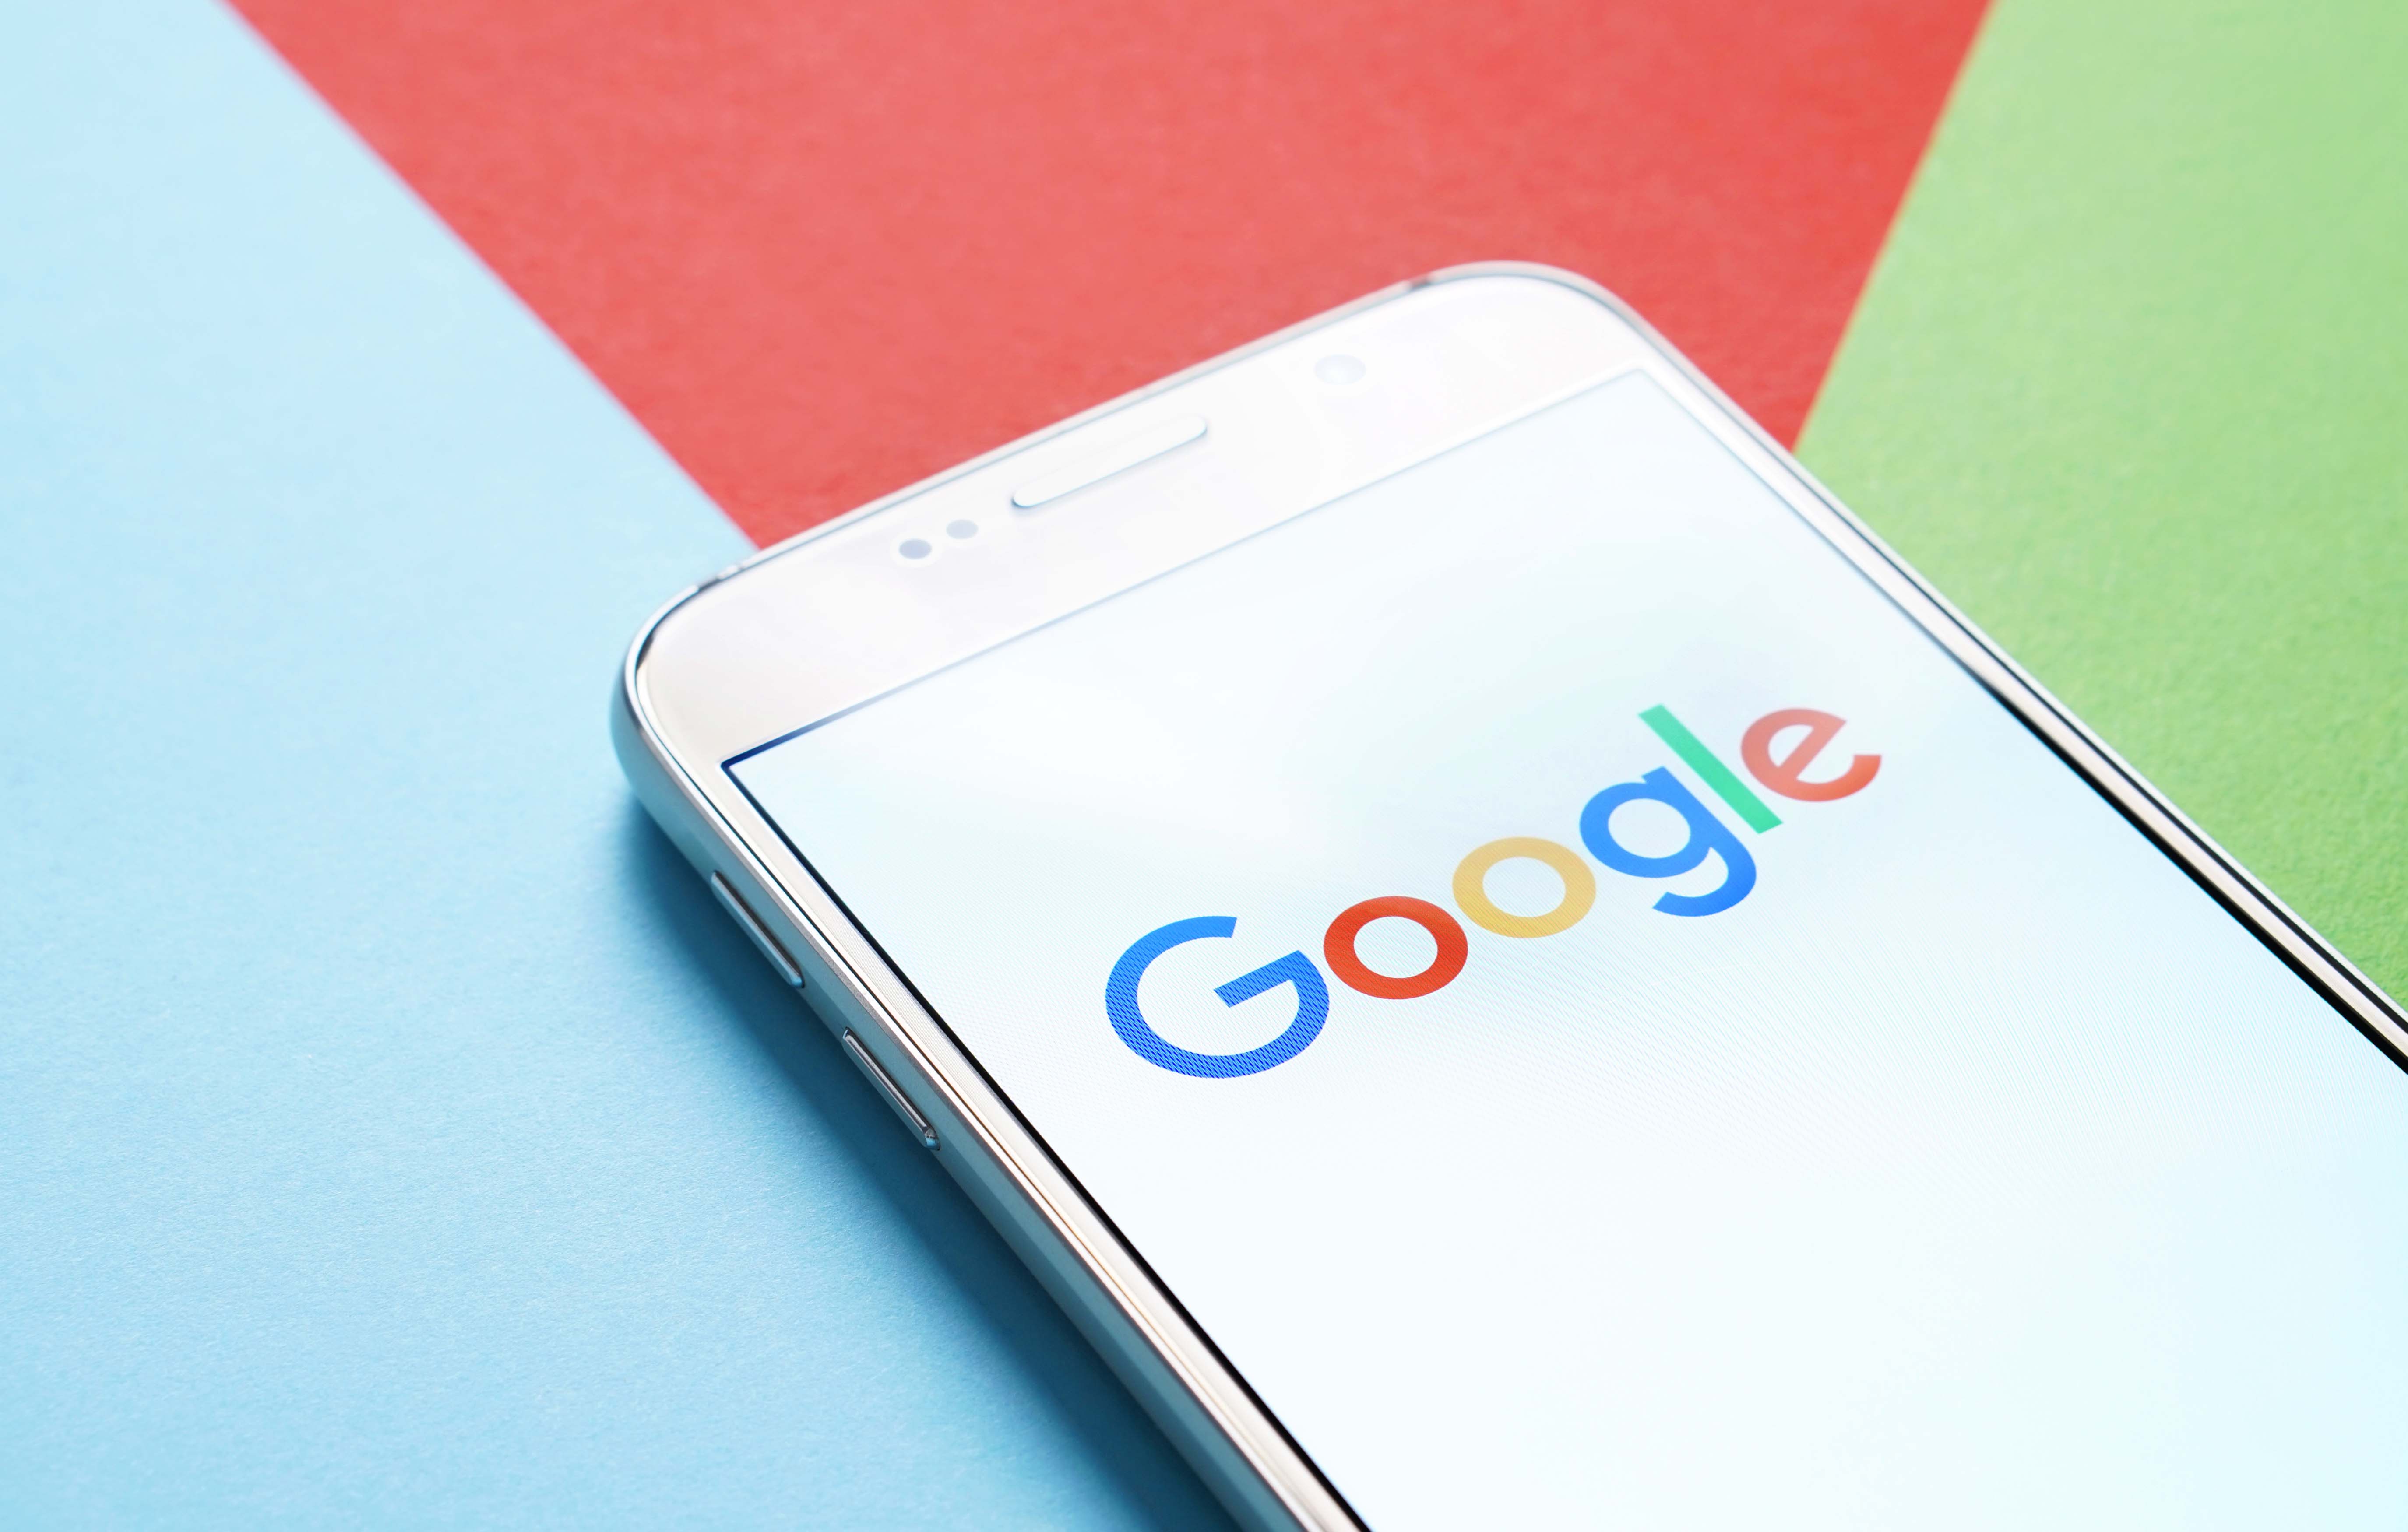 Google’s Q2 2020 Earnings Analysis: Performance Marketing Trends in Times of COVID-19